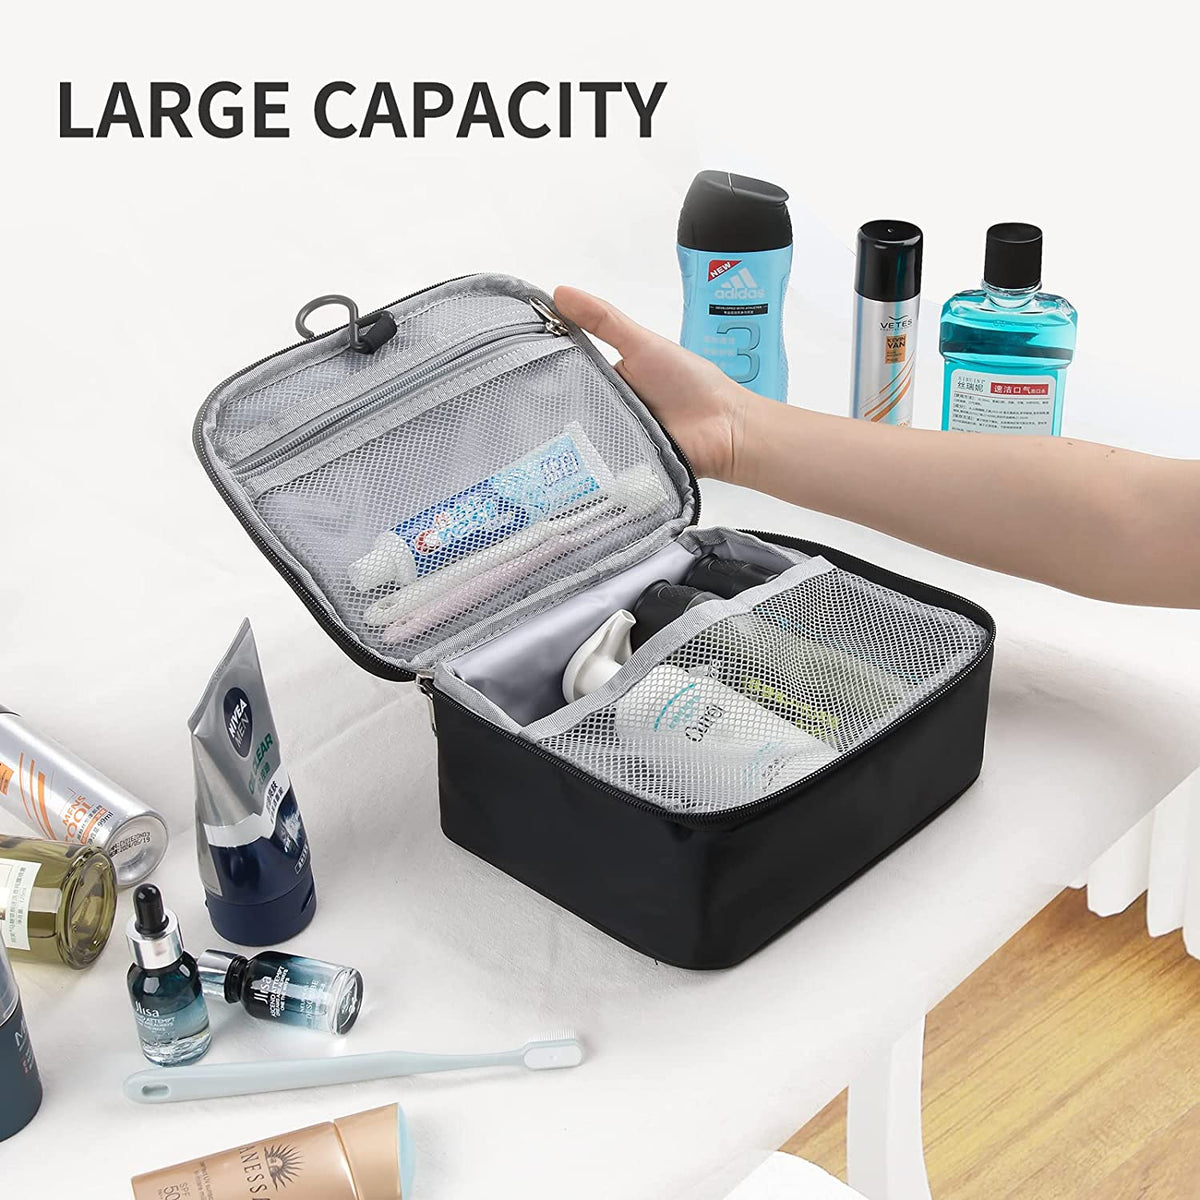 Toiletry Bags & Hanging Travel Organizers